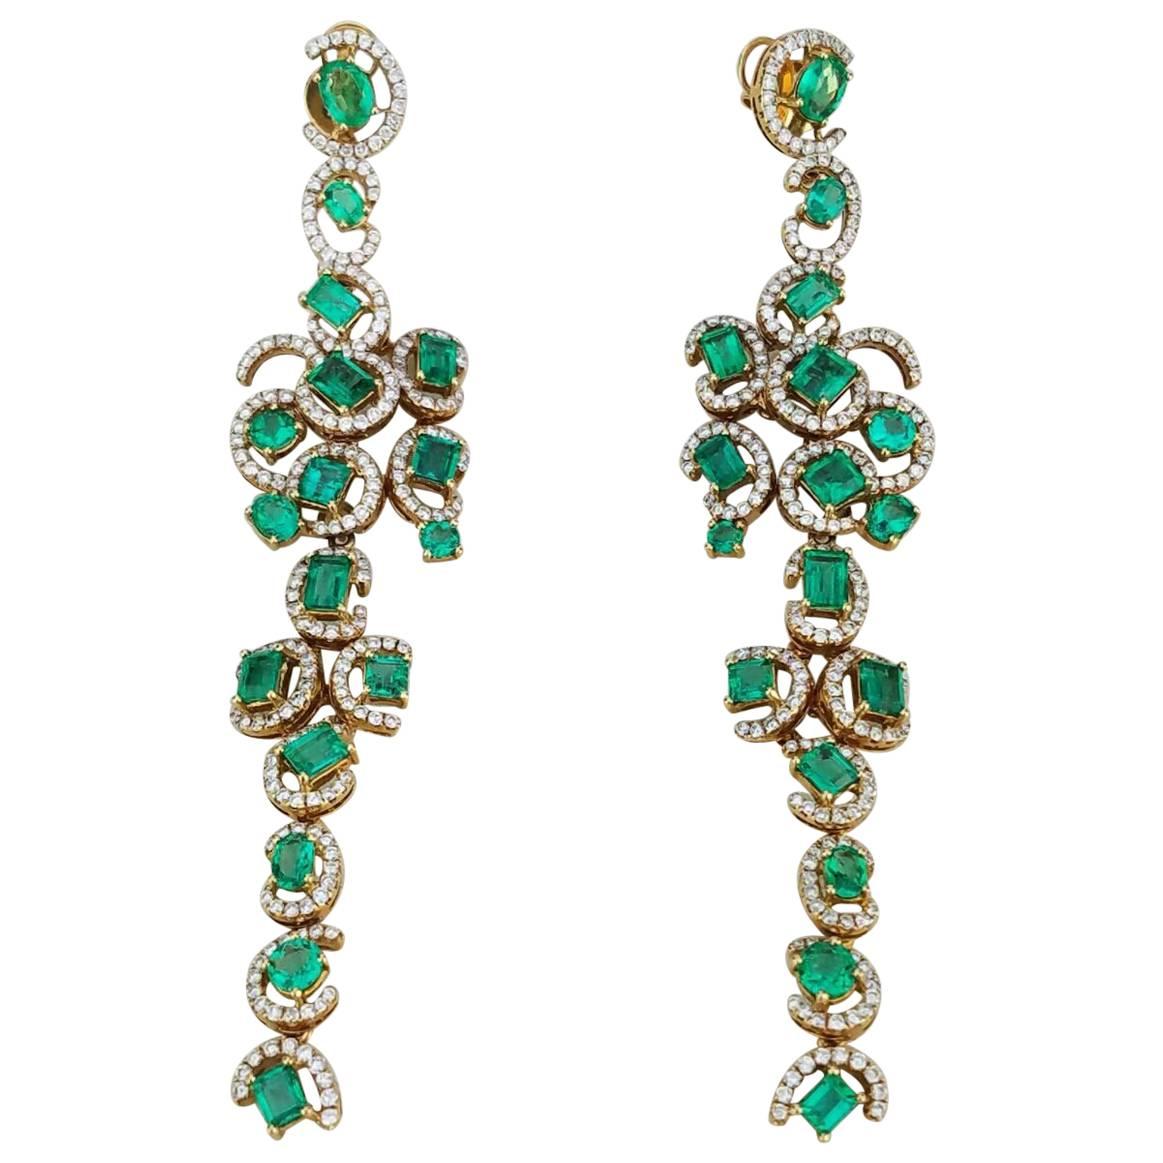 Statement Colombian Emerald and Diamond Dangling Earrings